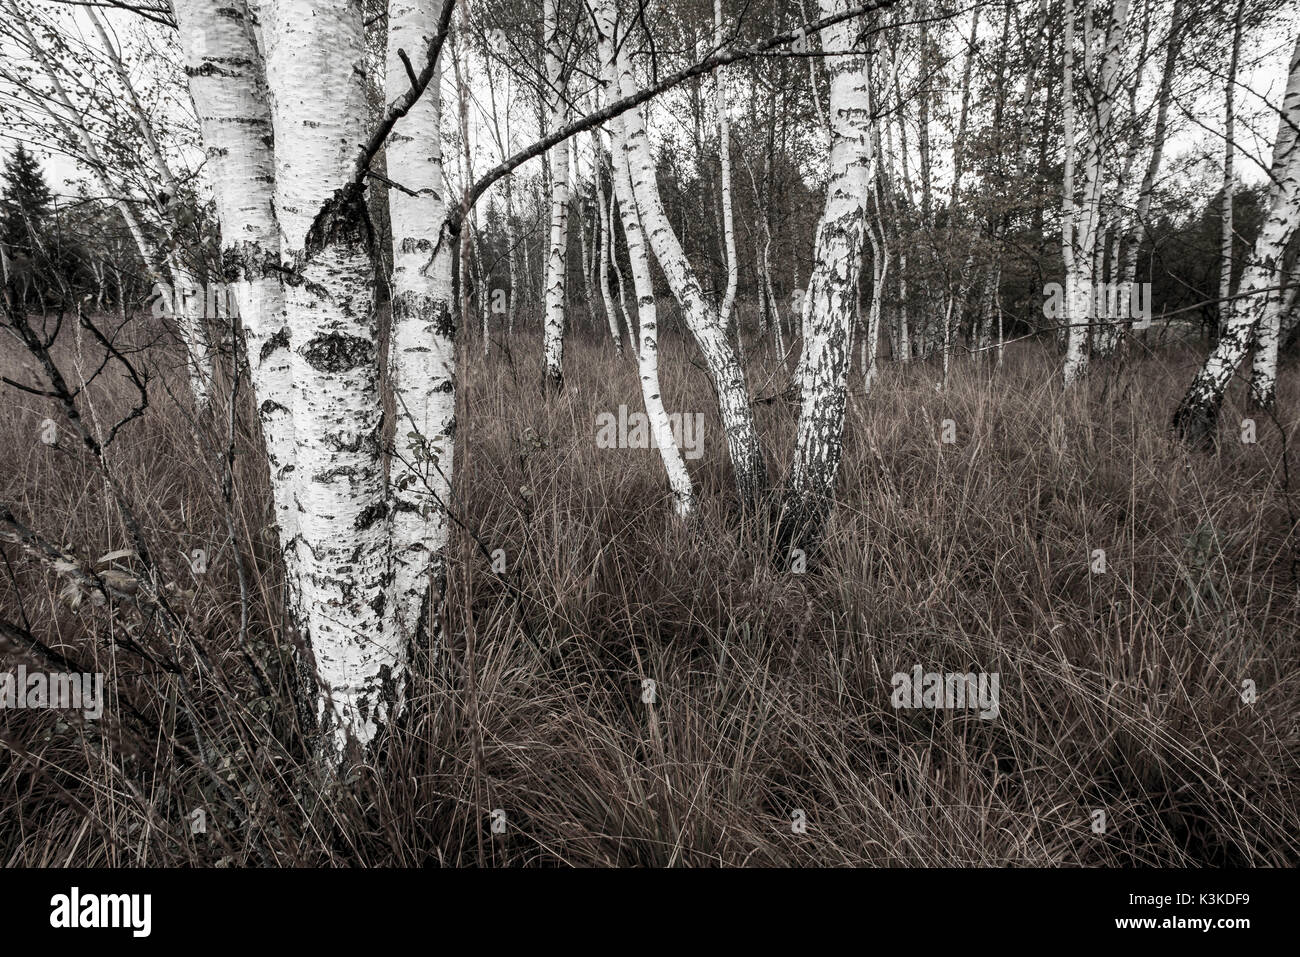 Birch groves with desaturated colours Stock Photo